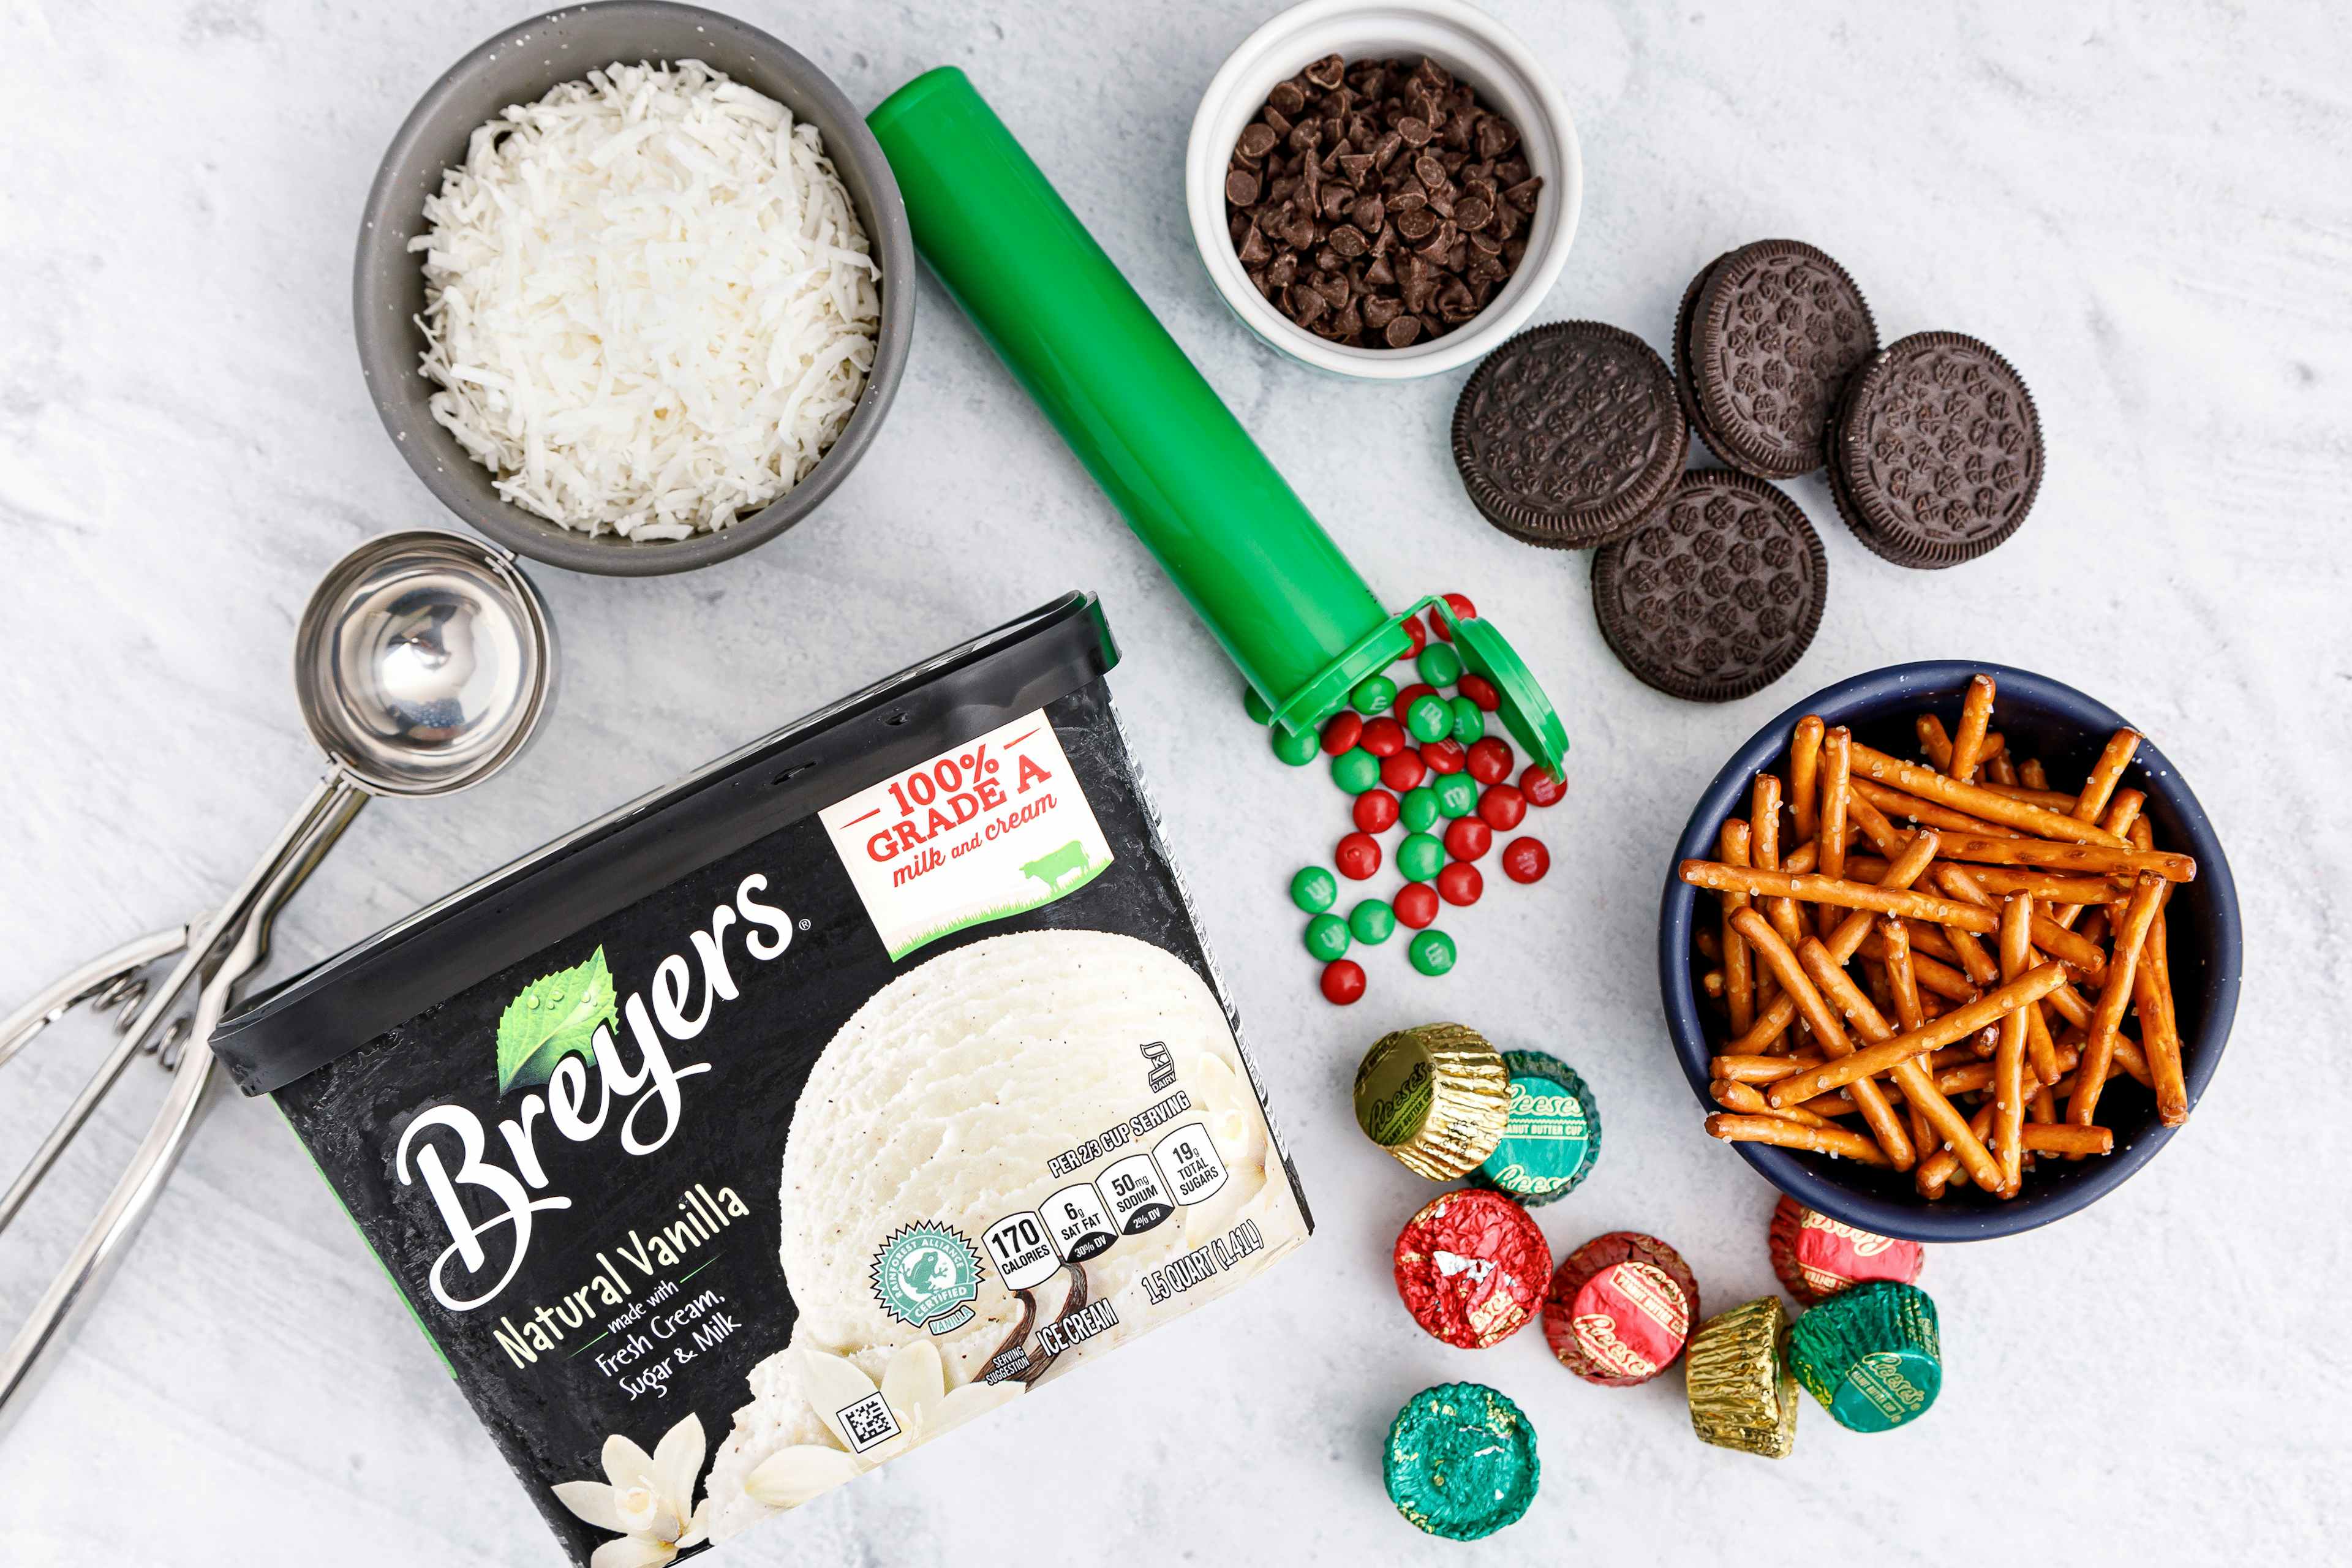 Breyers ice cream and ingredients for making an ice cream snowman